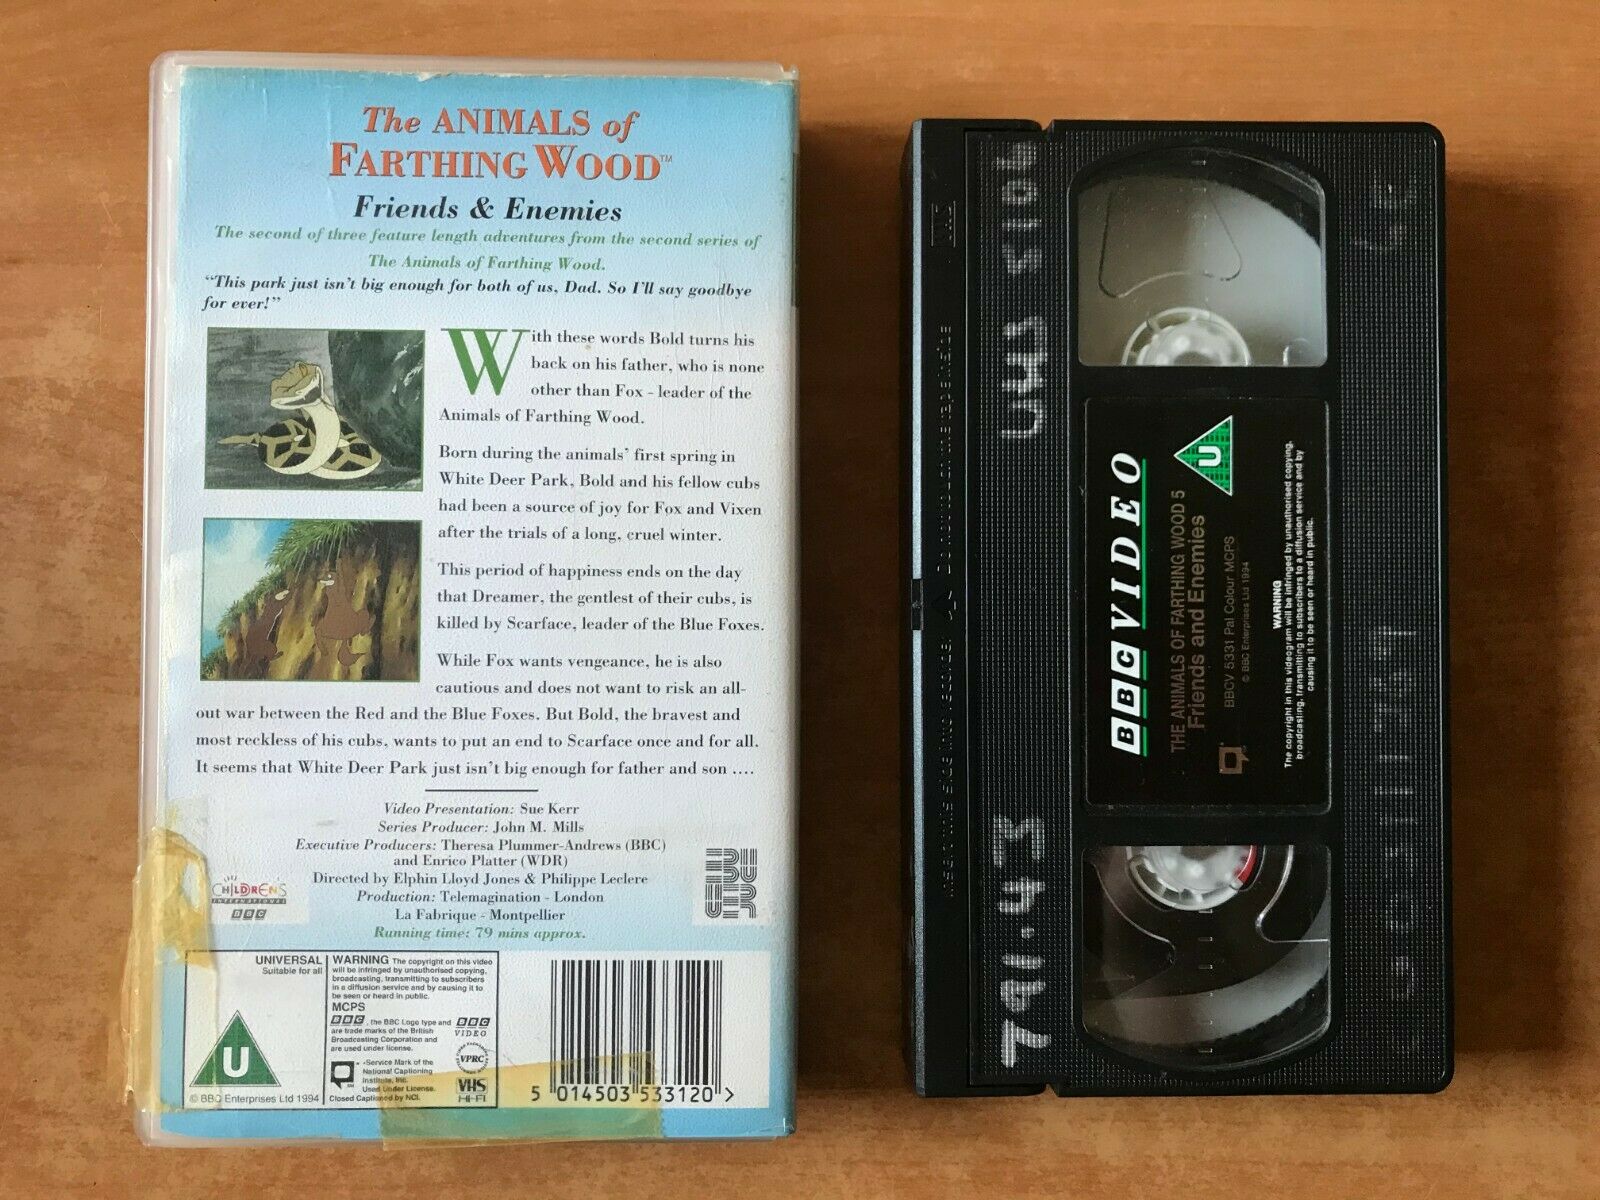 The Animals Of Farthing Wood: Friends And Enemies [Colin Dann] Children's - VHS-